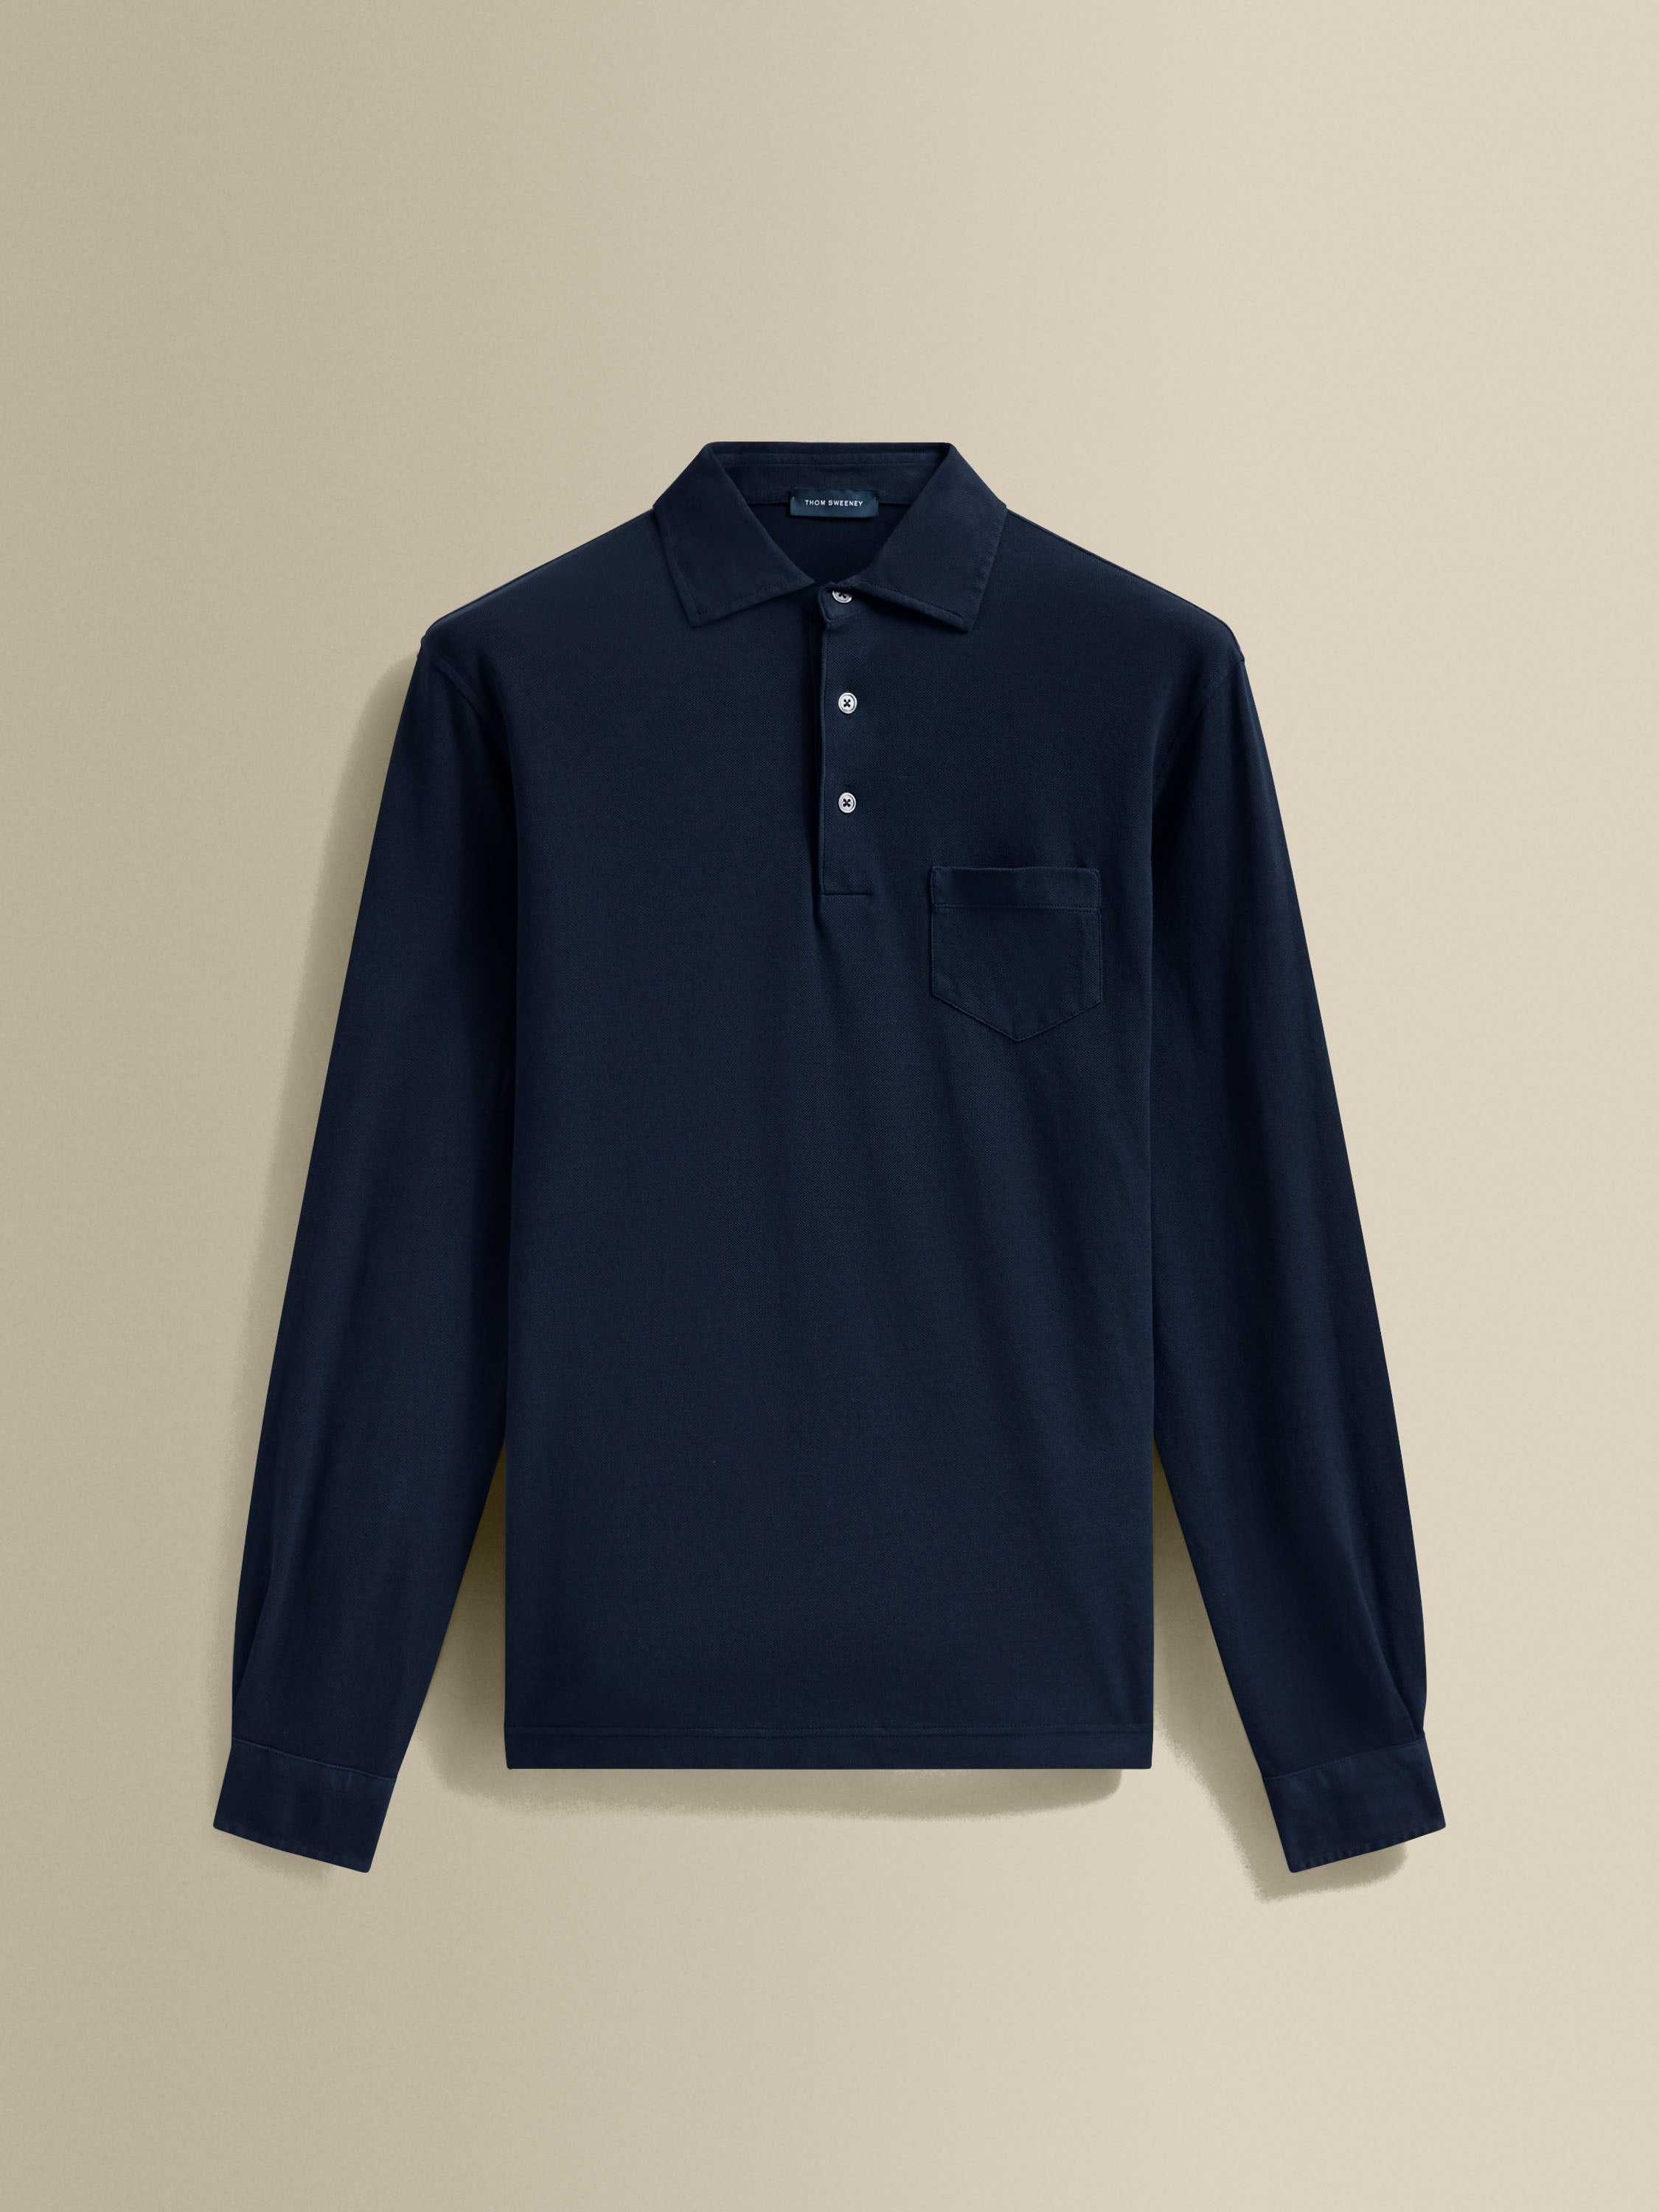 Cotton Pique Long Sleeve Polo Shirt Navy Product Image